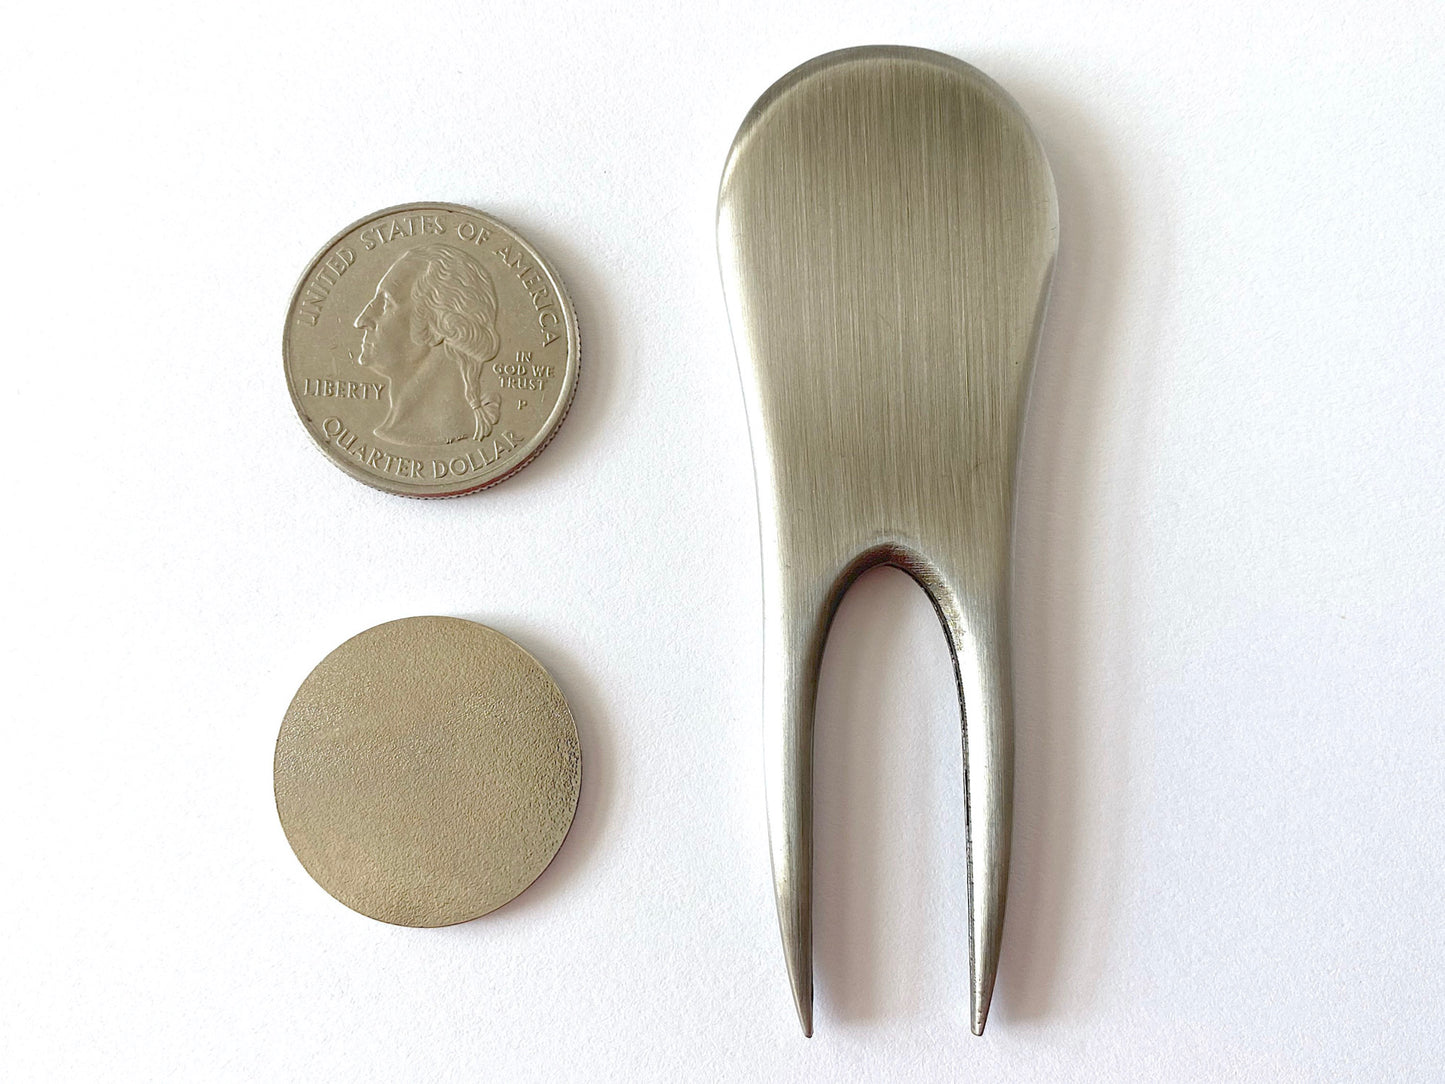 Infantry Golf Divot Tool and Ball Marker